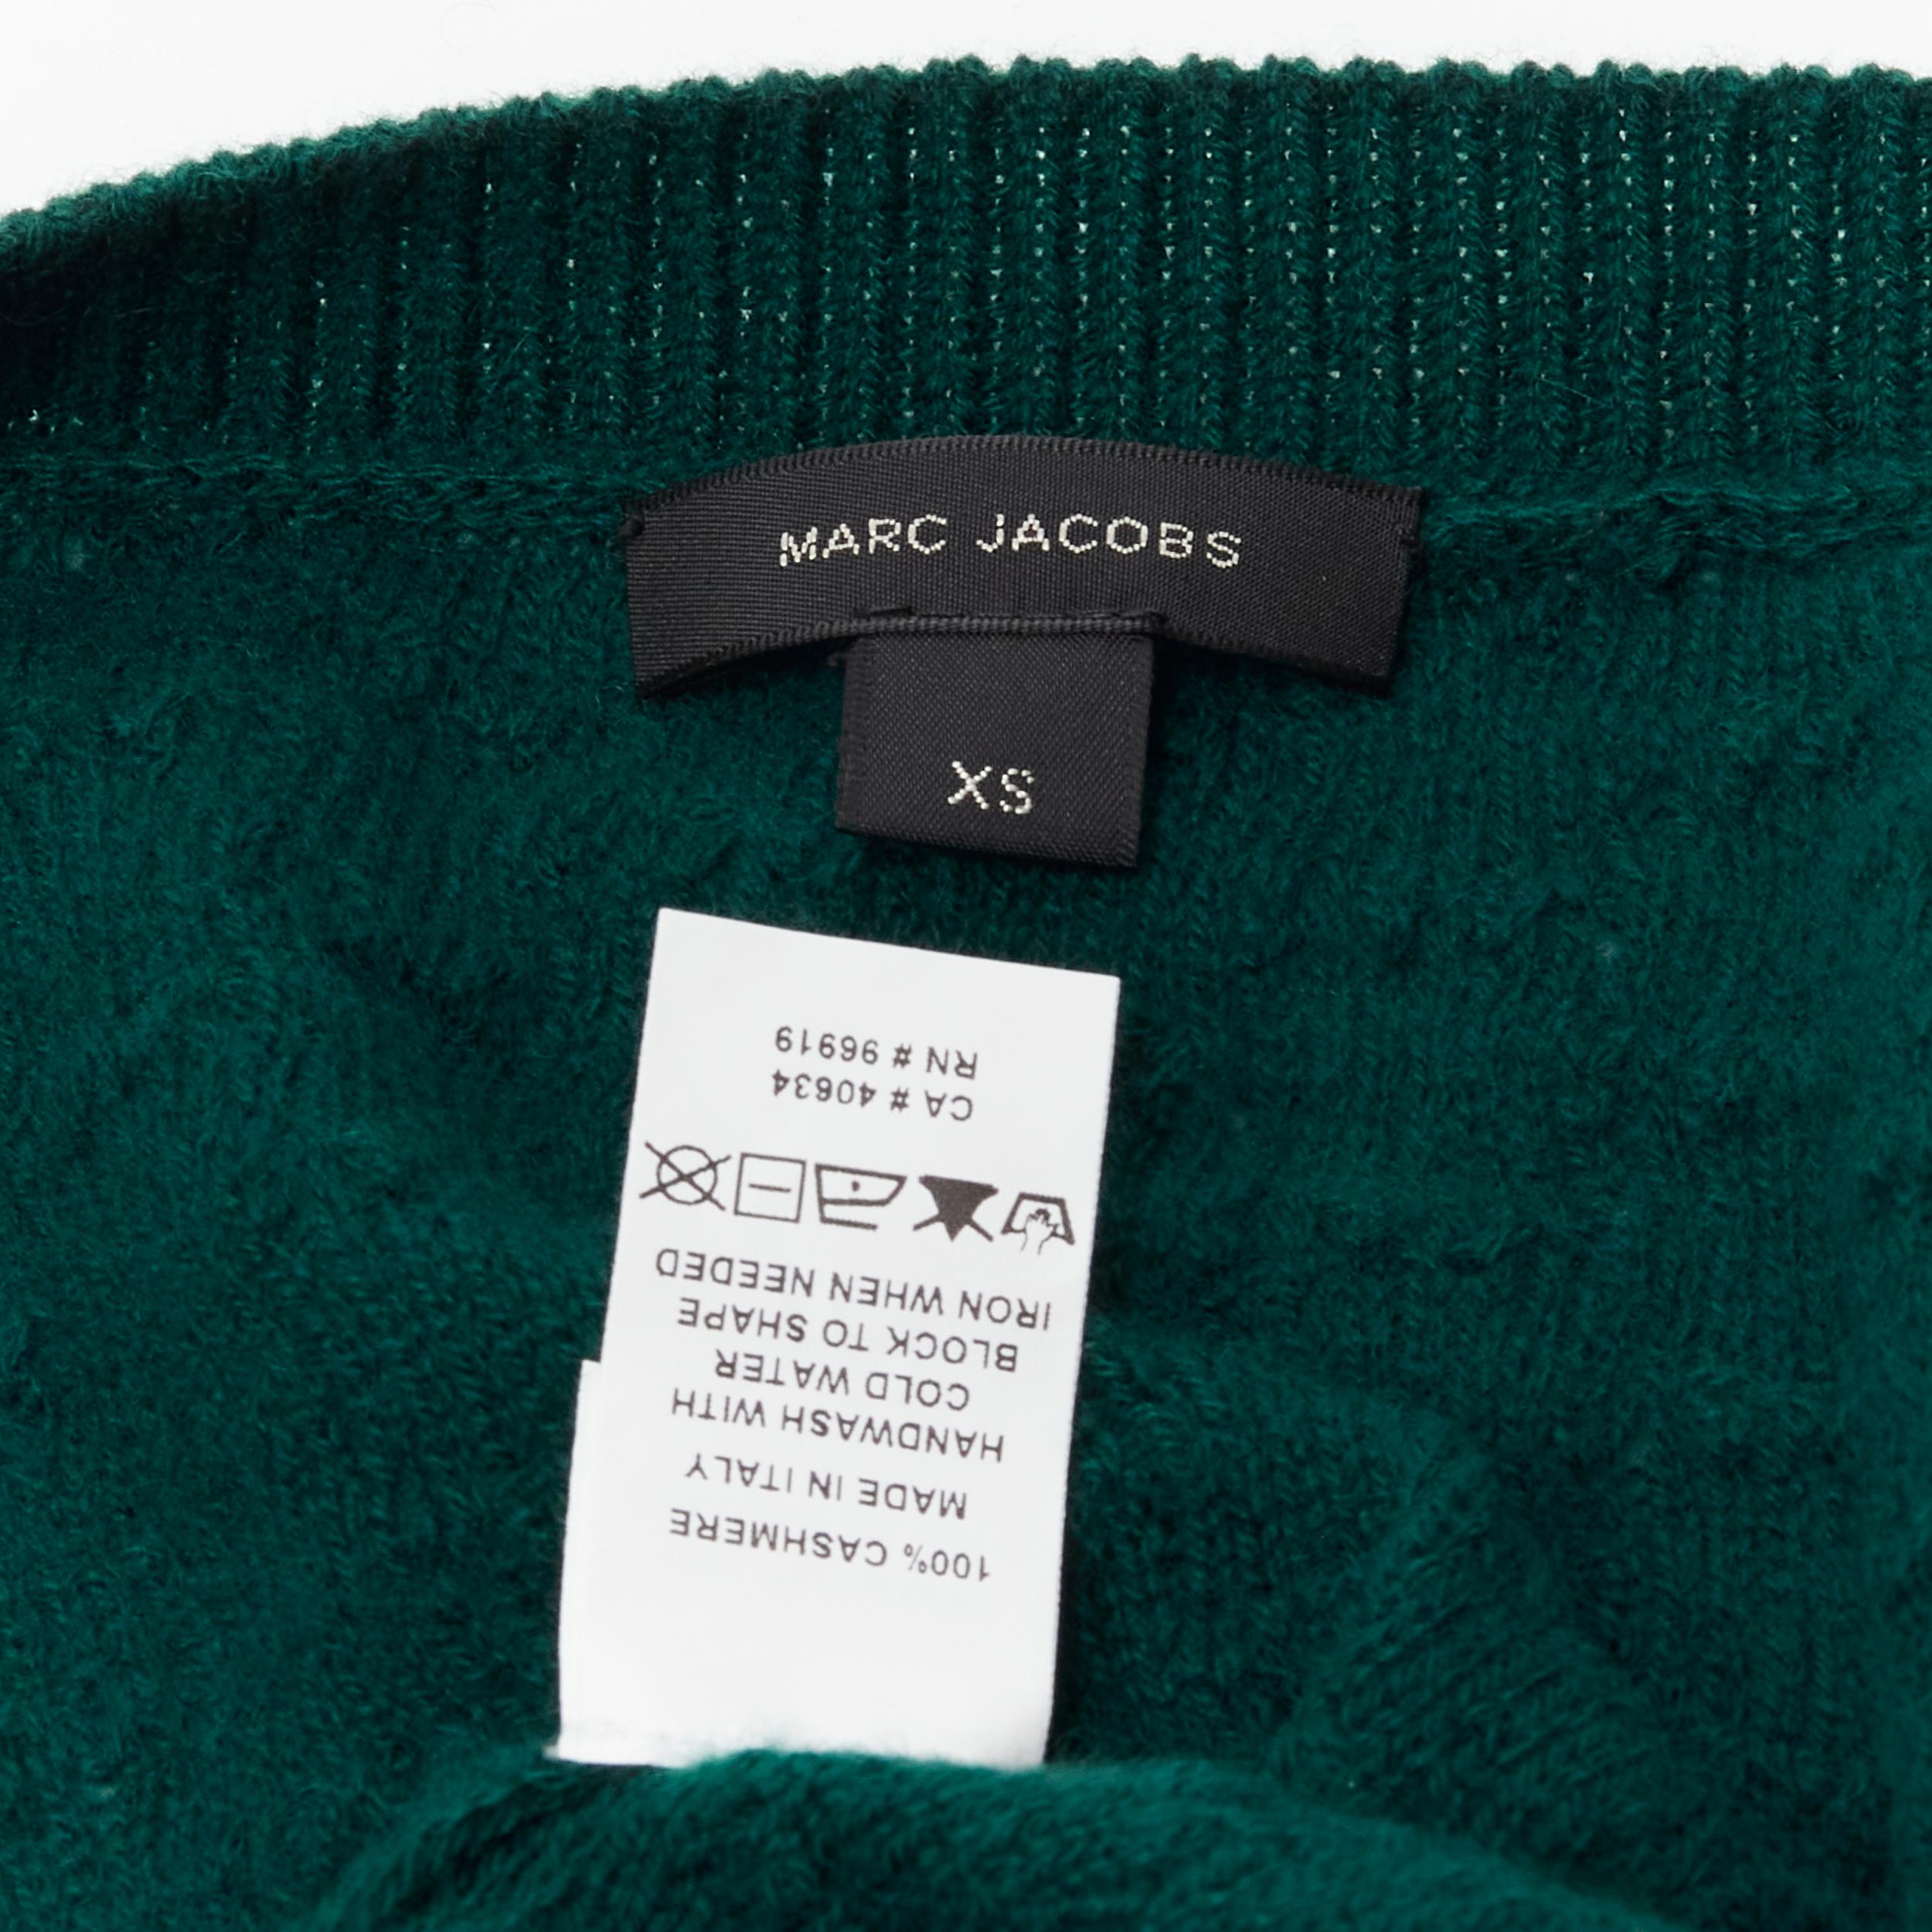 MARC JACOBS 100% cashmere green textured knit crystal button cardigan XS 4